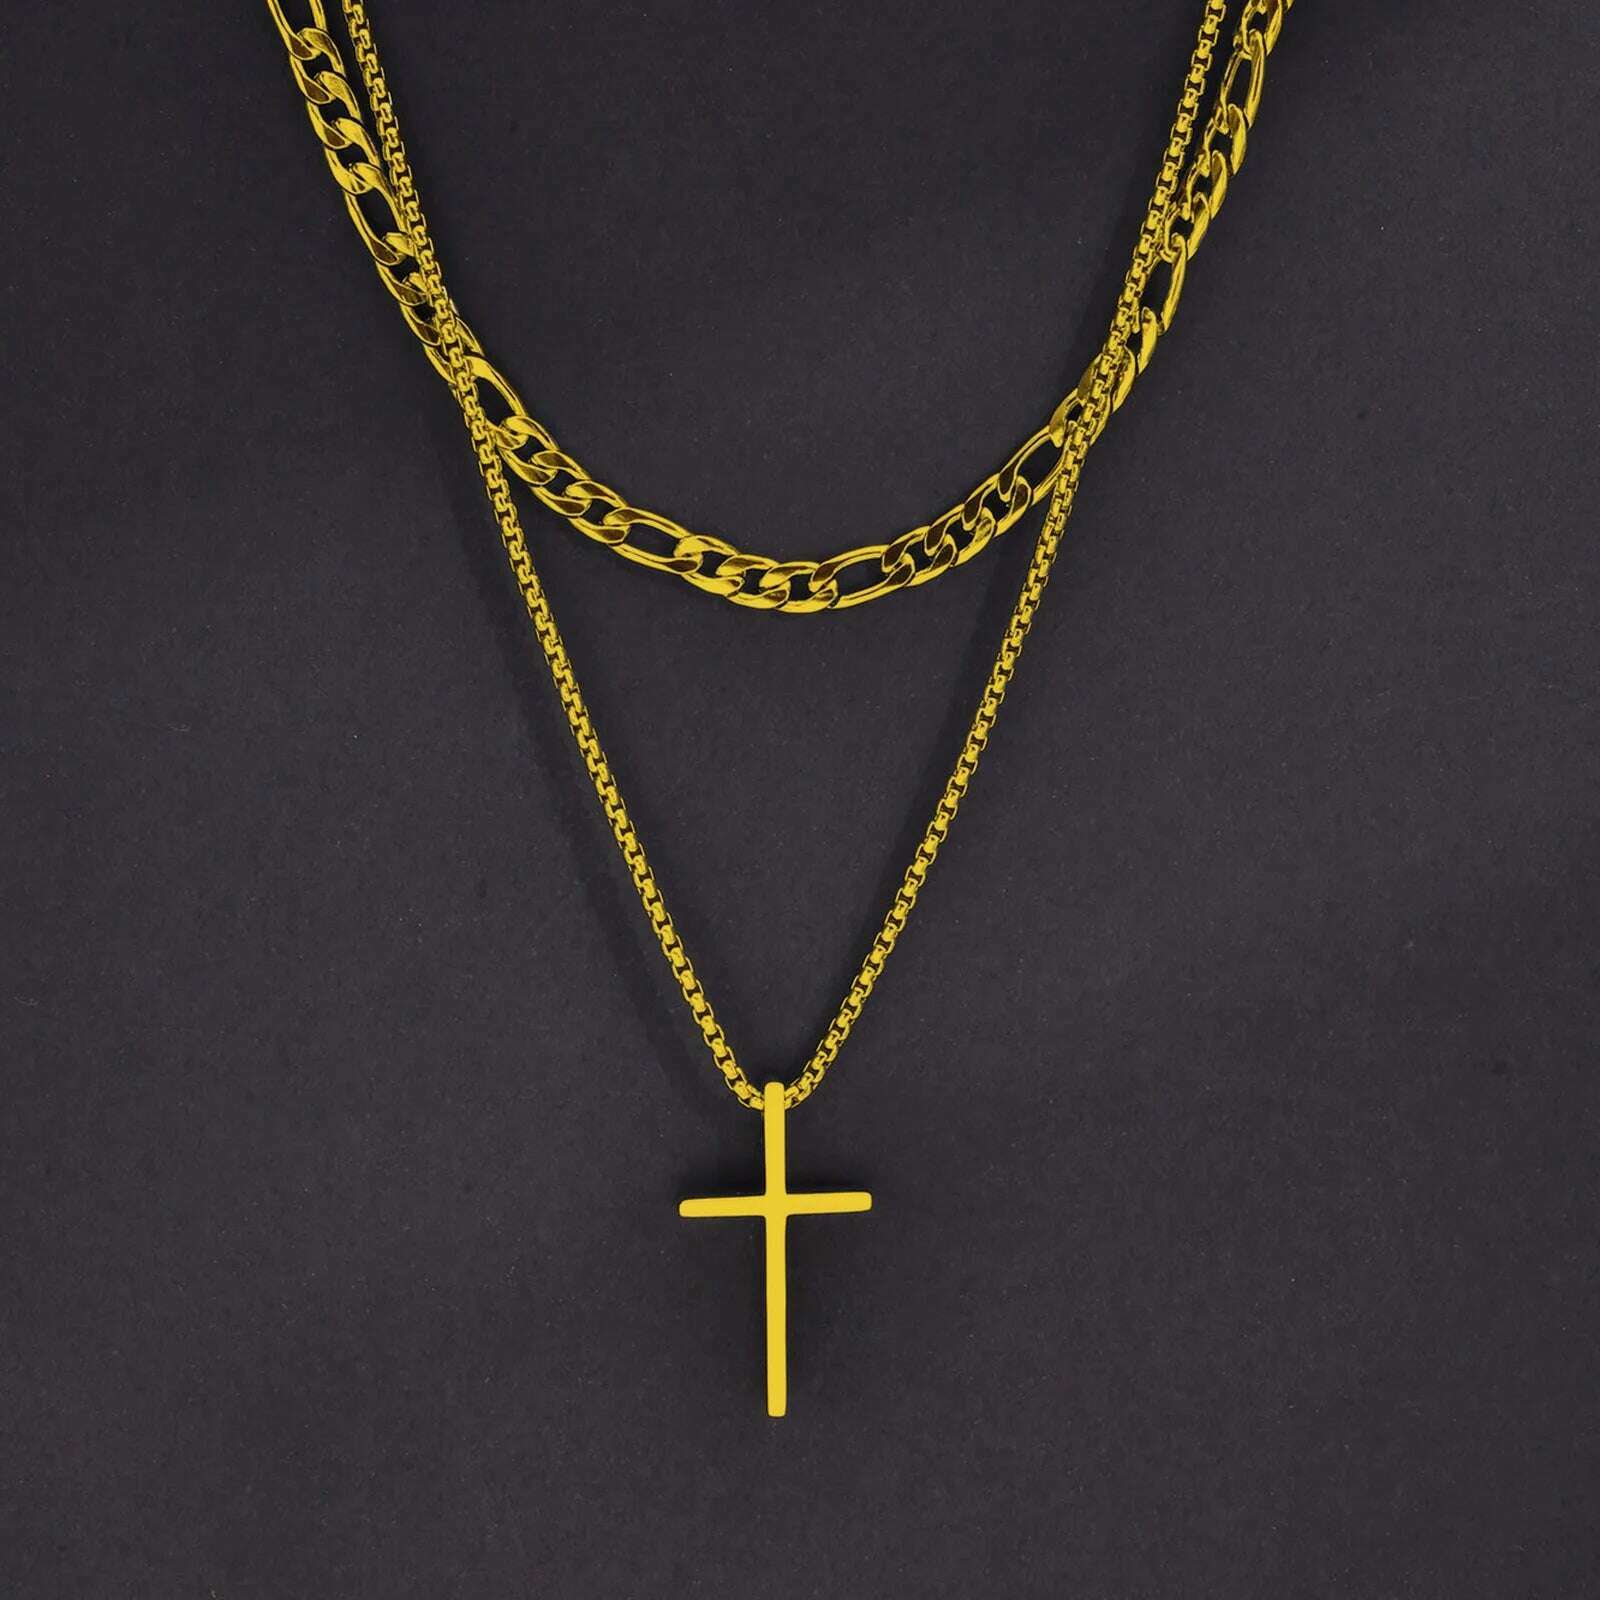 KIMLUD, Vnox Mens Cross Necklaces, Stainless Steel Layered Plain Cross Pendant, Rope Box Chain Necklace, Simple Prayer Jesus Collar, NC-1035G NC-158-50G, KIMLUD Womens Clothes